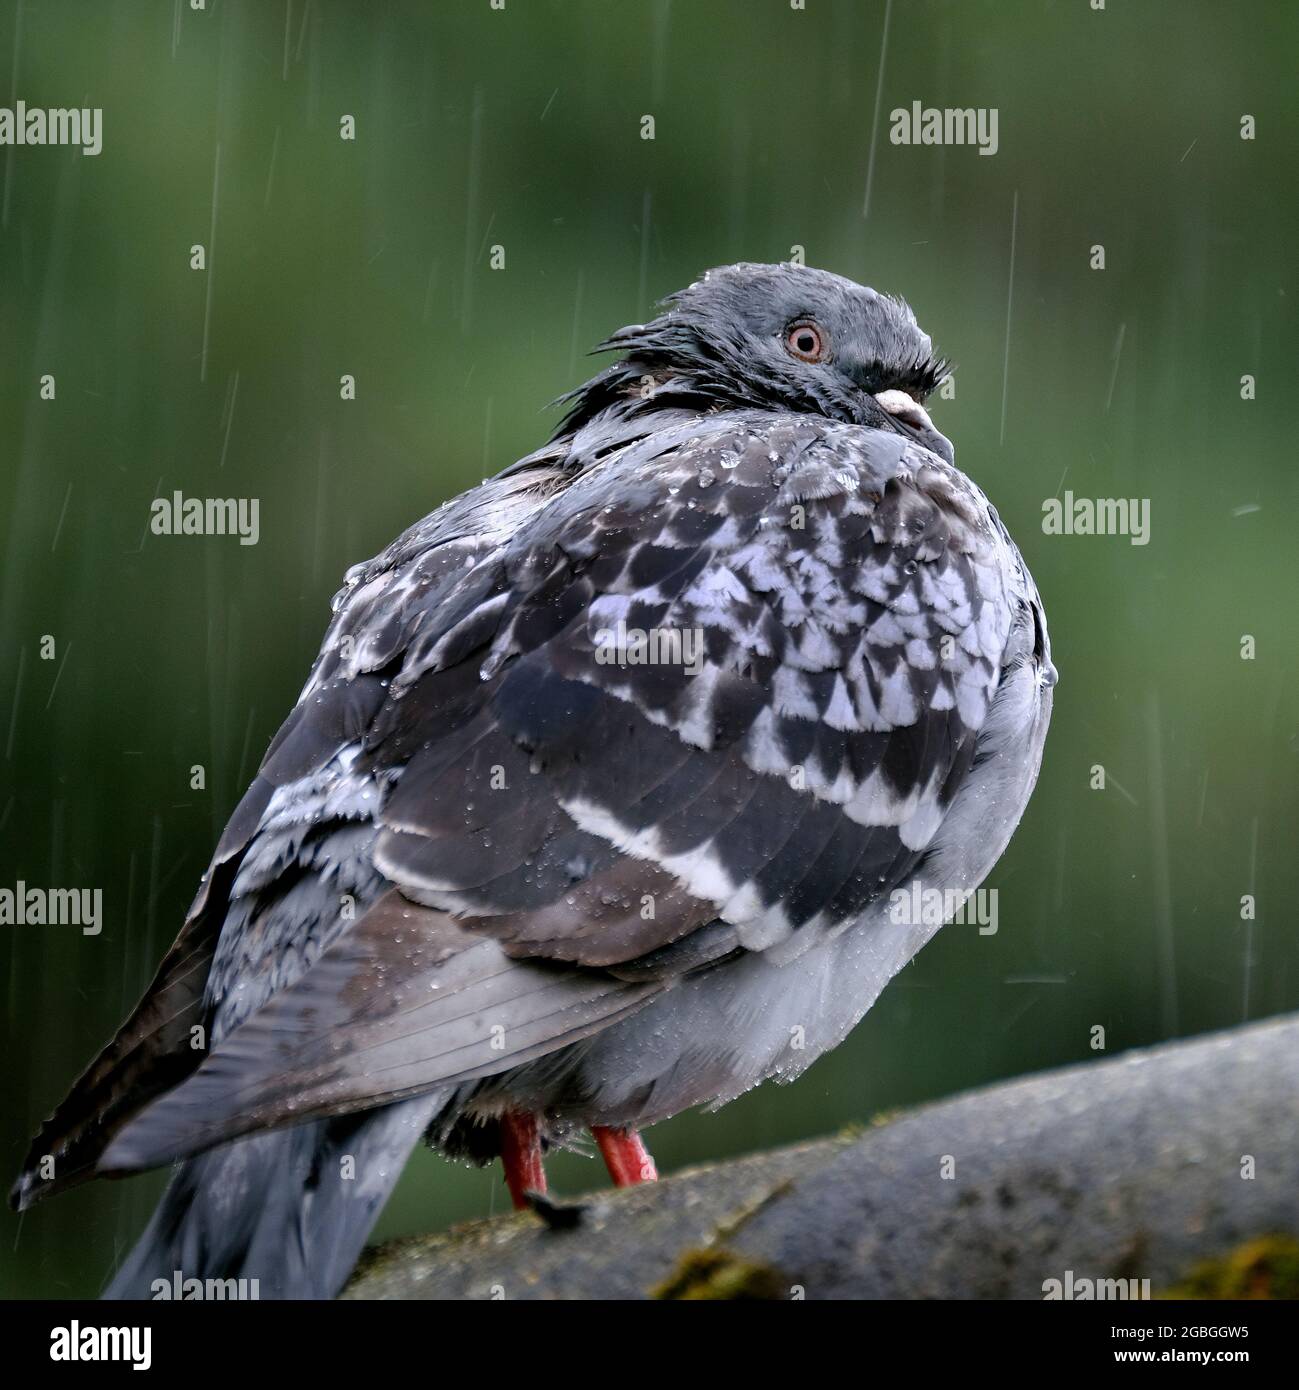 Feral pigeon getting soaked in heavy rain shower. Stock Photo